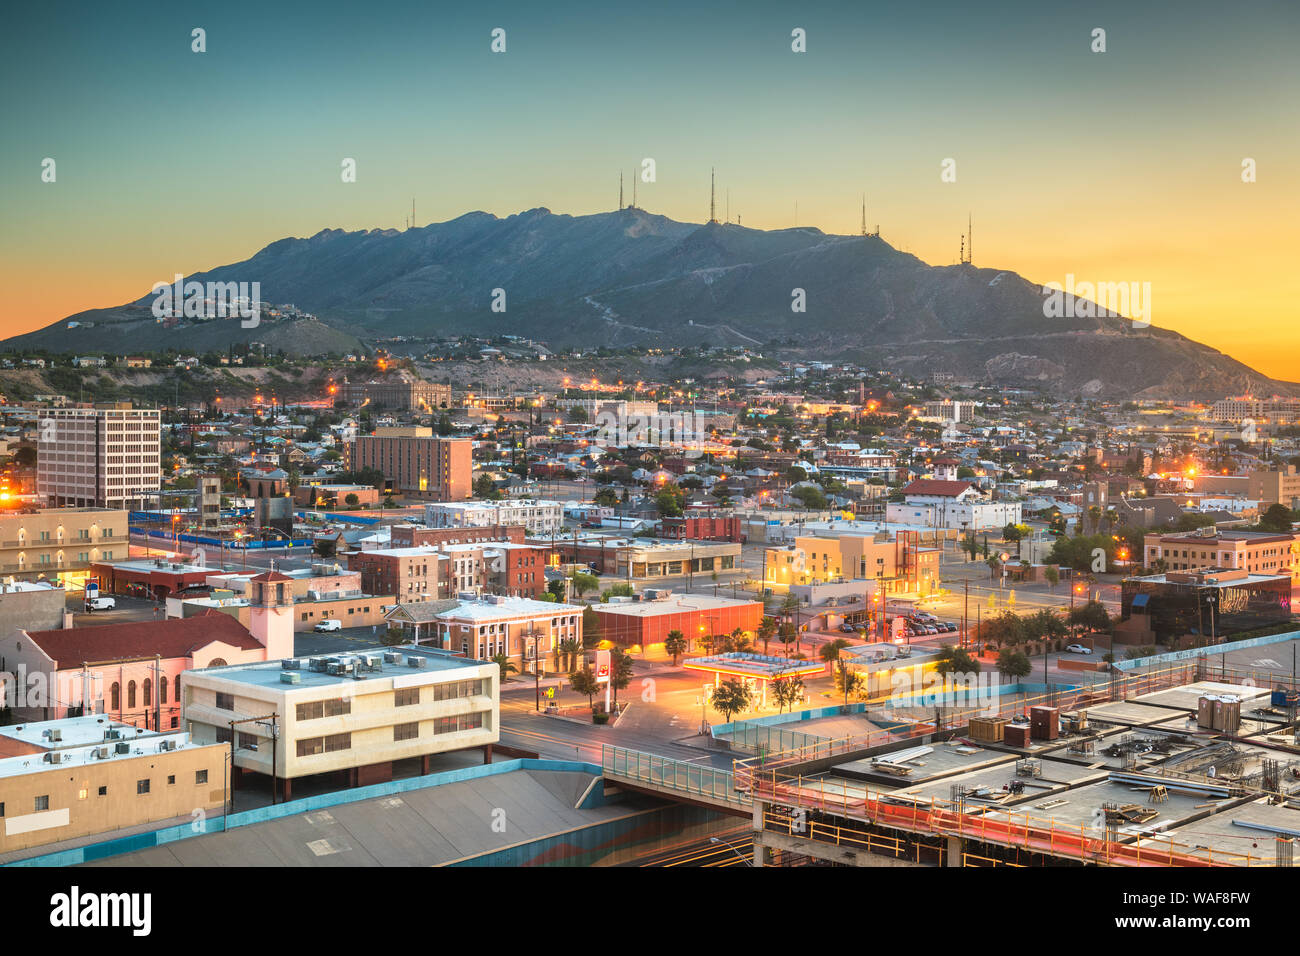 El Paso, Texas, USA  downtown city skyline towards Scenic Drive Overlook at dawn. Stock Photo